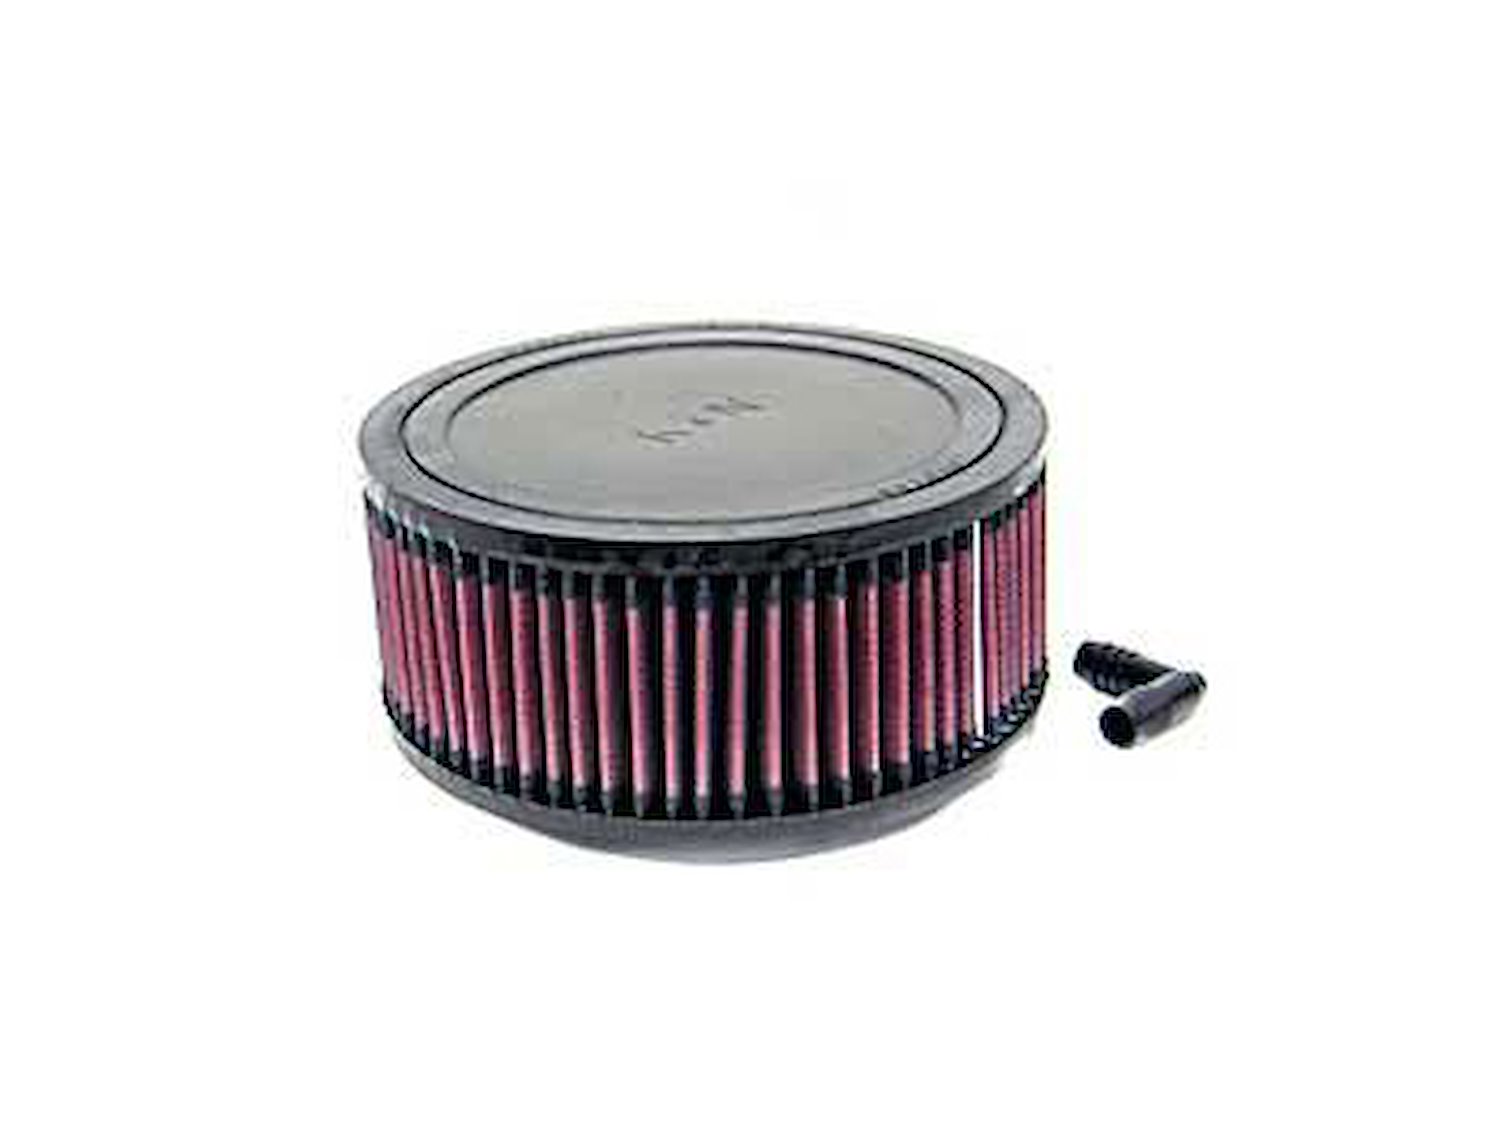 Round Straight Air Filter Flange Dia. (F): 3.063" (78 mm)